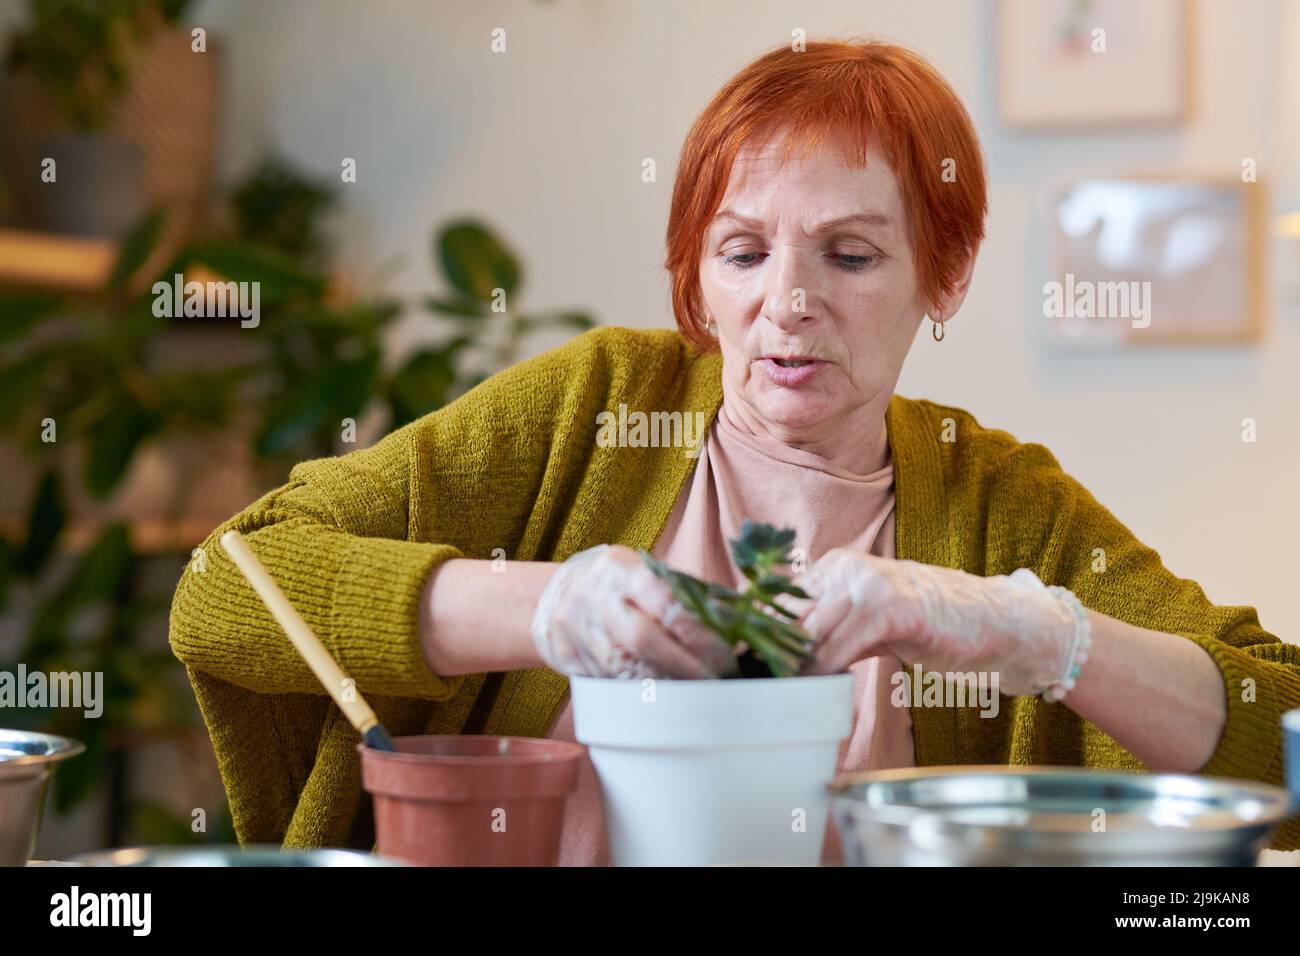 Mature red haired woman planting flowers in pots at table during seasonal time Stock Photo